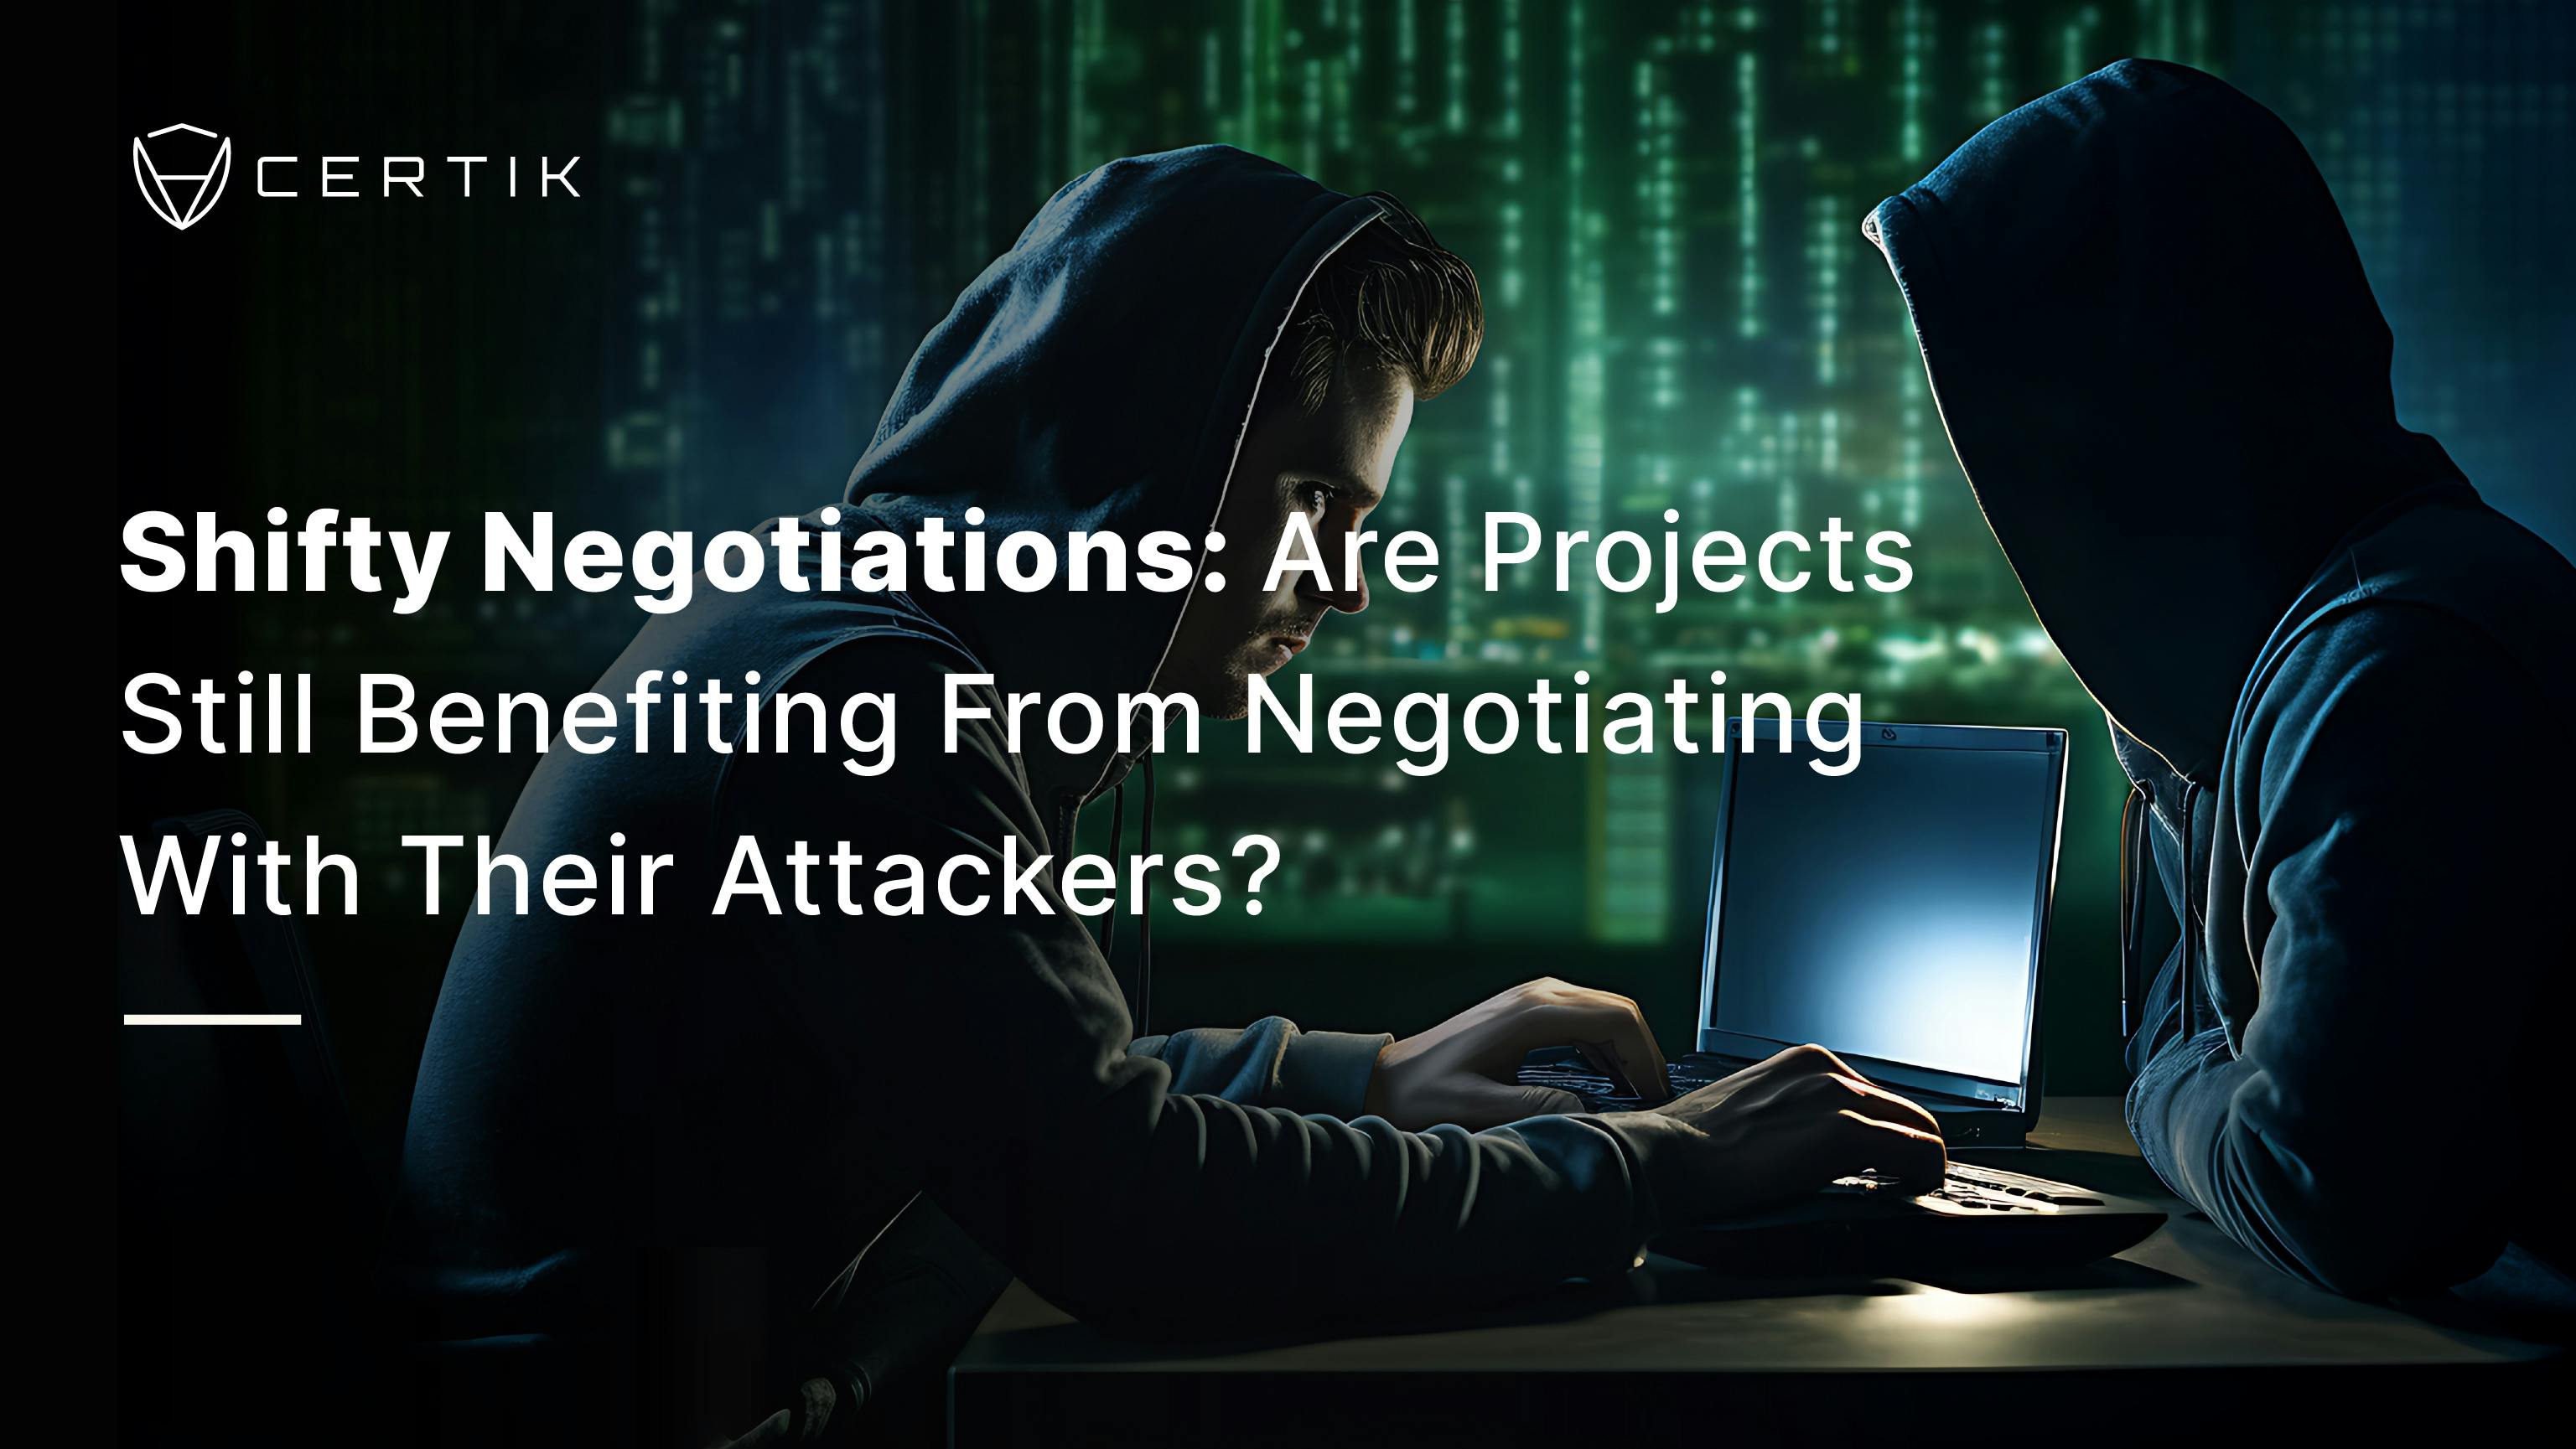 Shifty Negotiations: Are Projects Still Benefiting From Negotiating With Their Attackers?